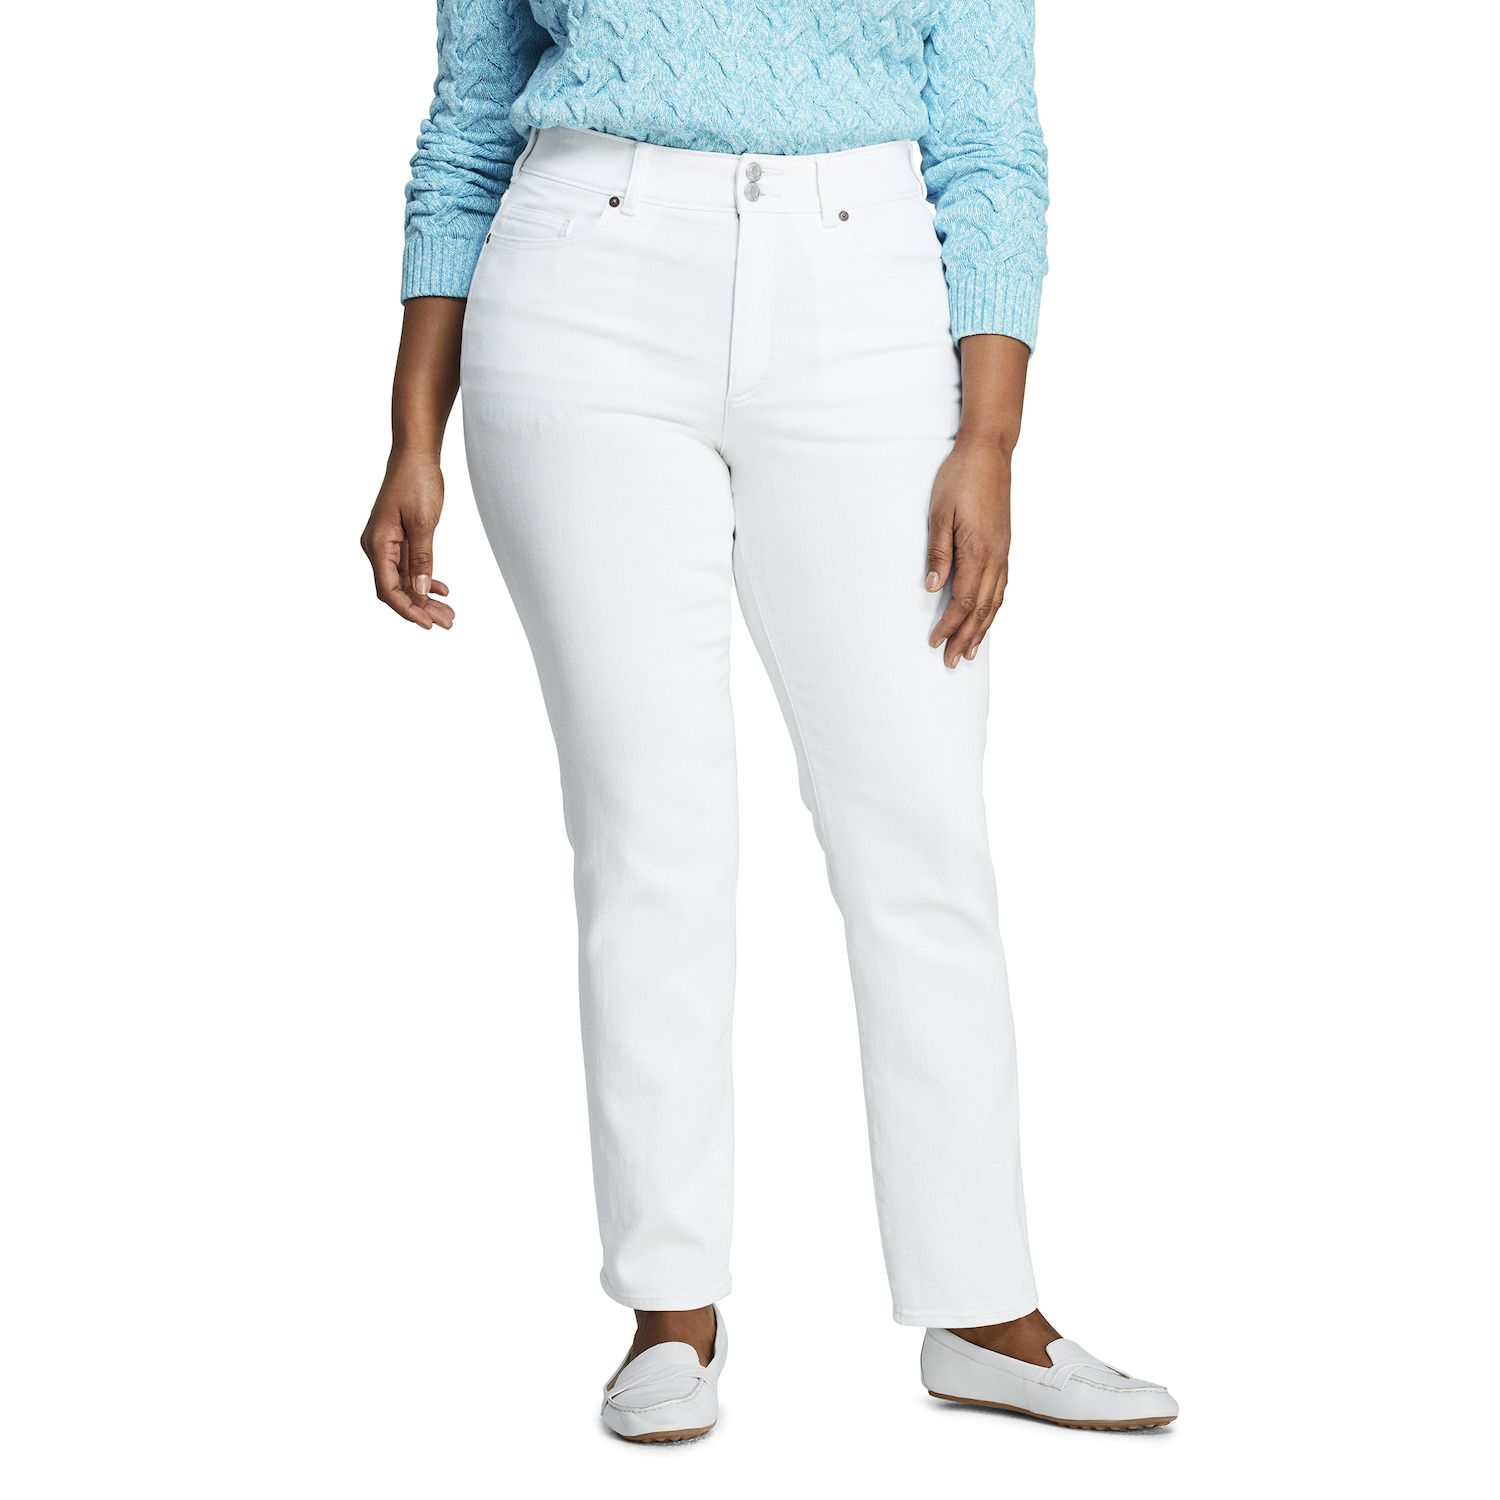 Image for Lands' End Plus Size High-Rise Shaping Straight-Leg Jeans at Kohl's.